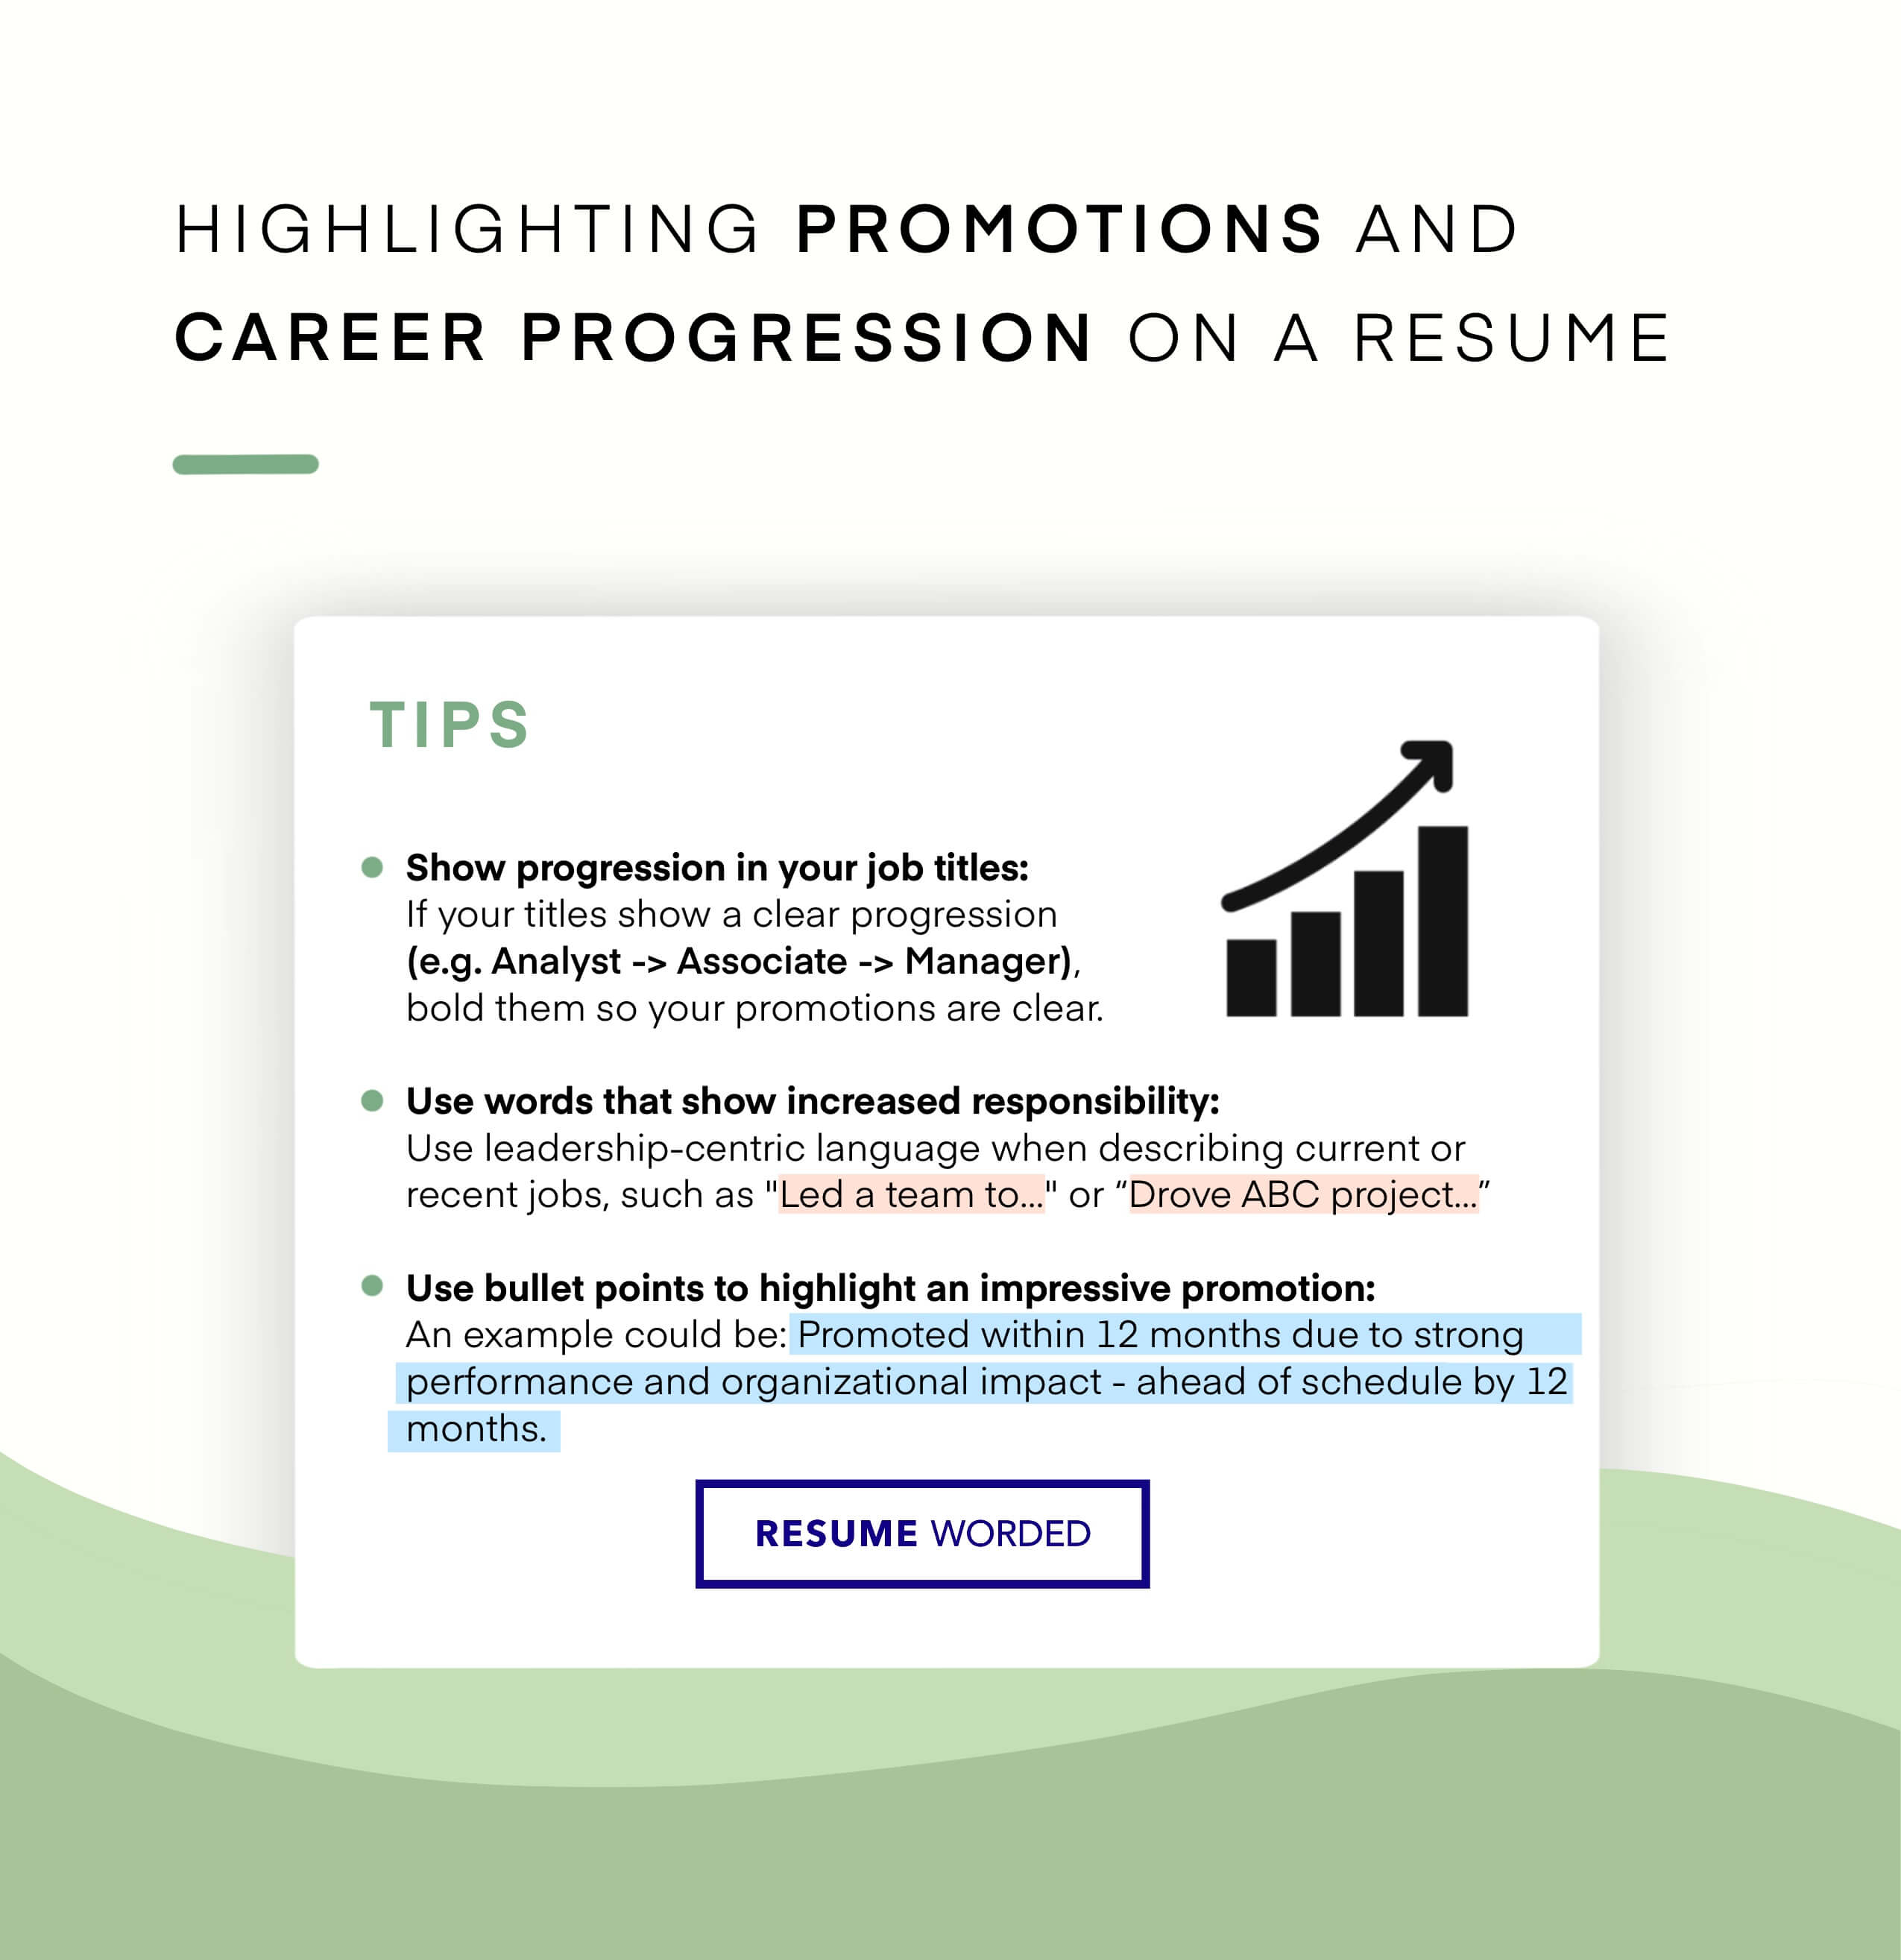 Highlight your capacity for growth - C-Level Executive Assistant Resume